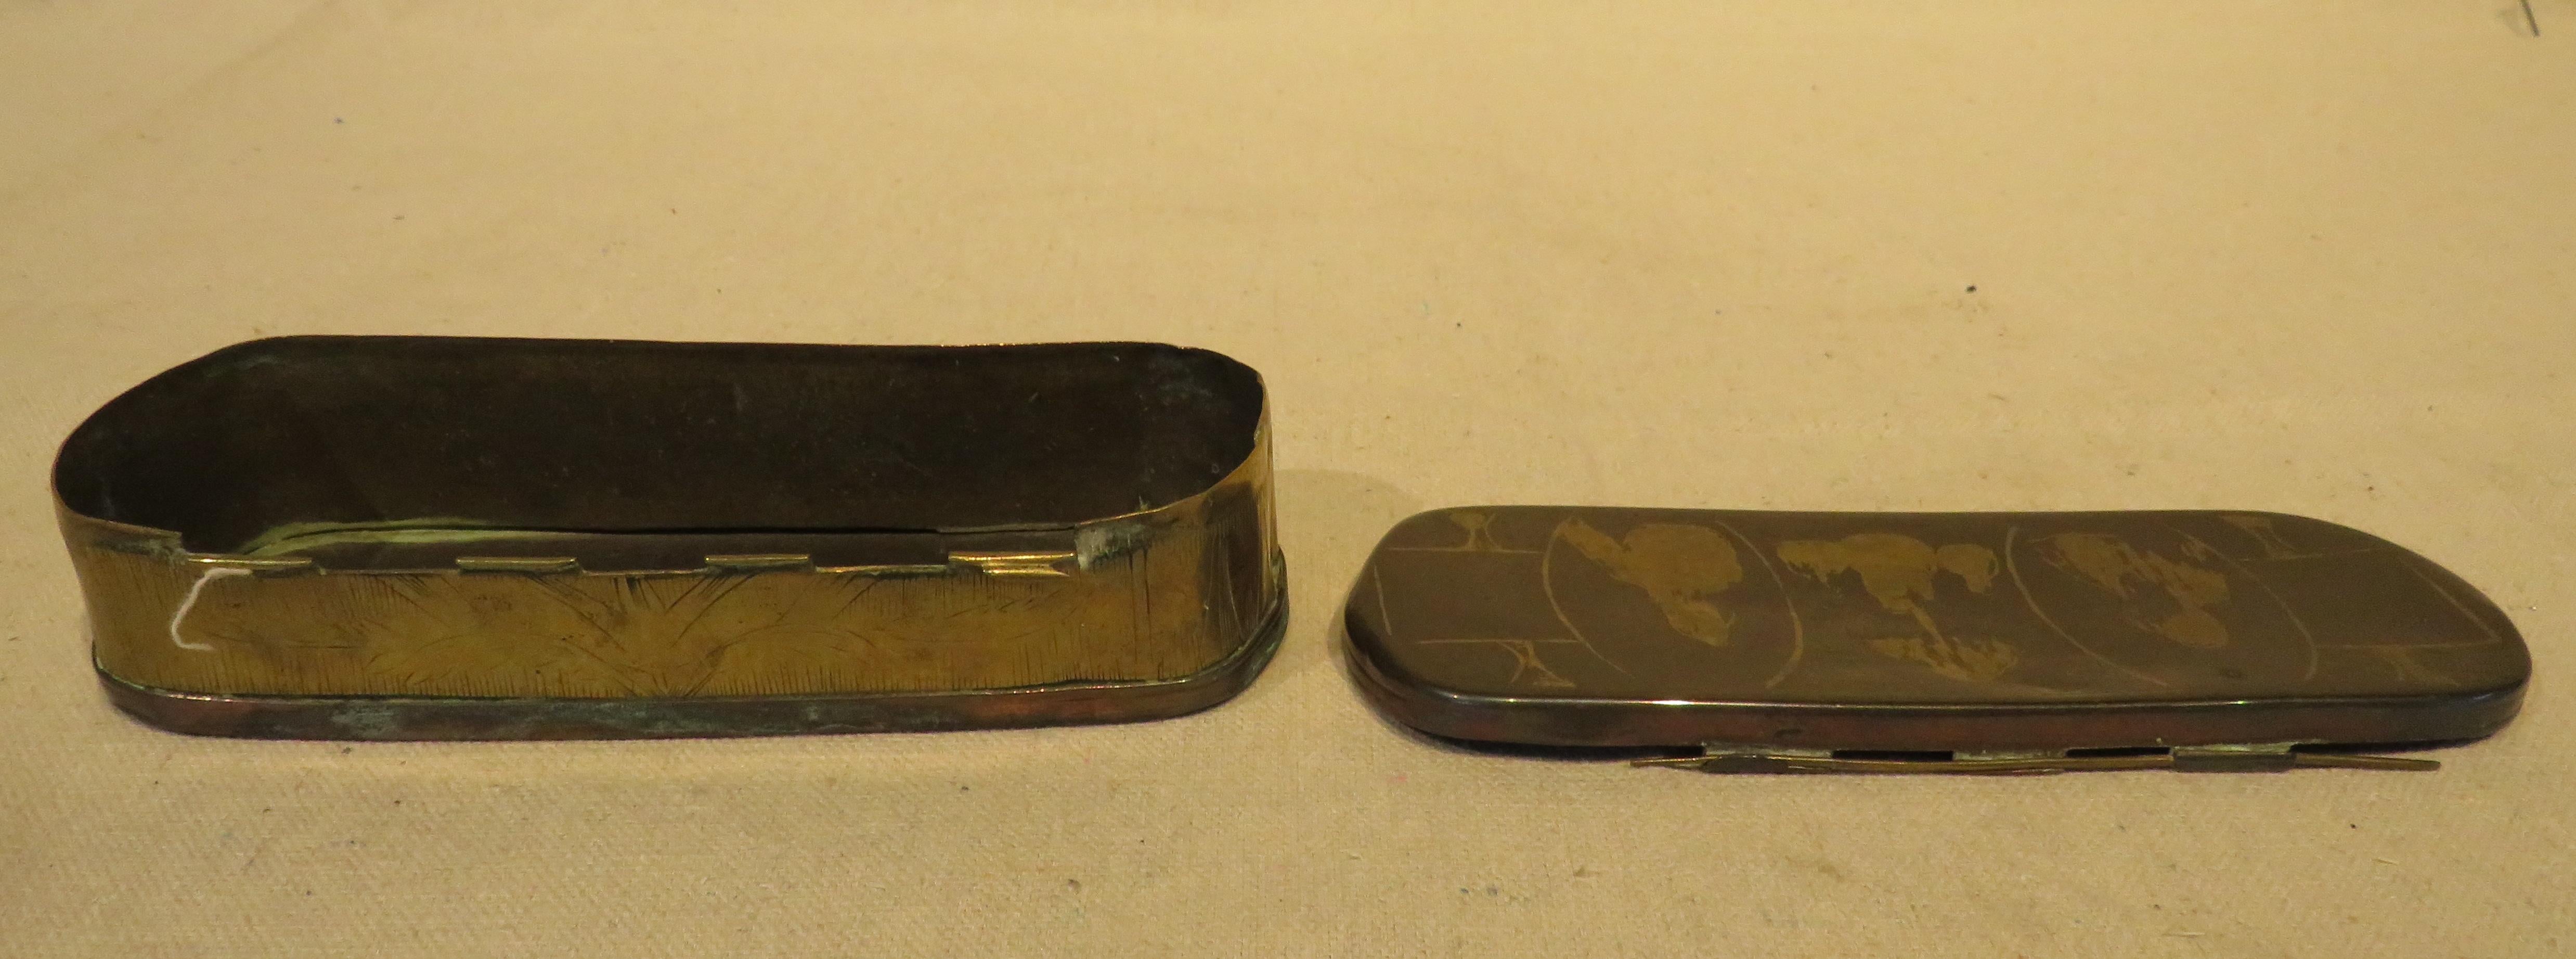 Engraved Brass and Copper Snuff Box, English, Circa 1850 For Sale 3